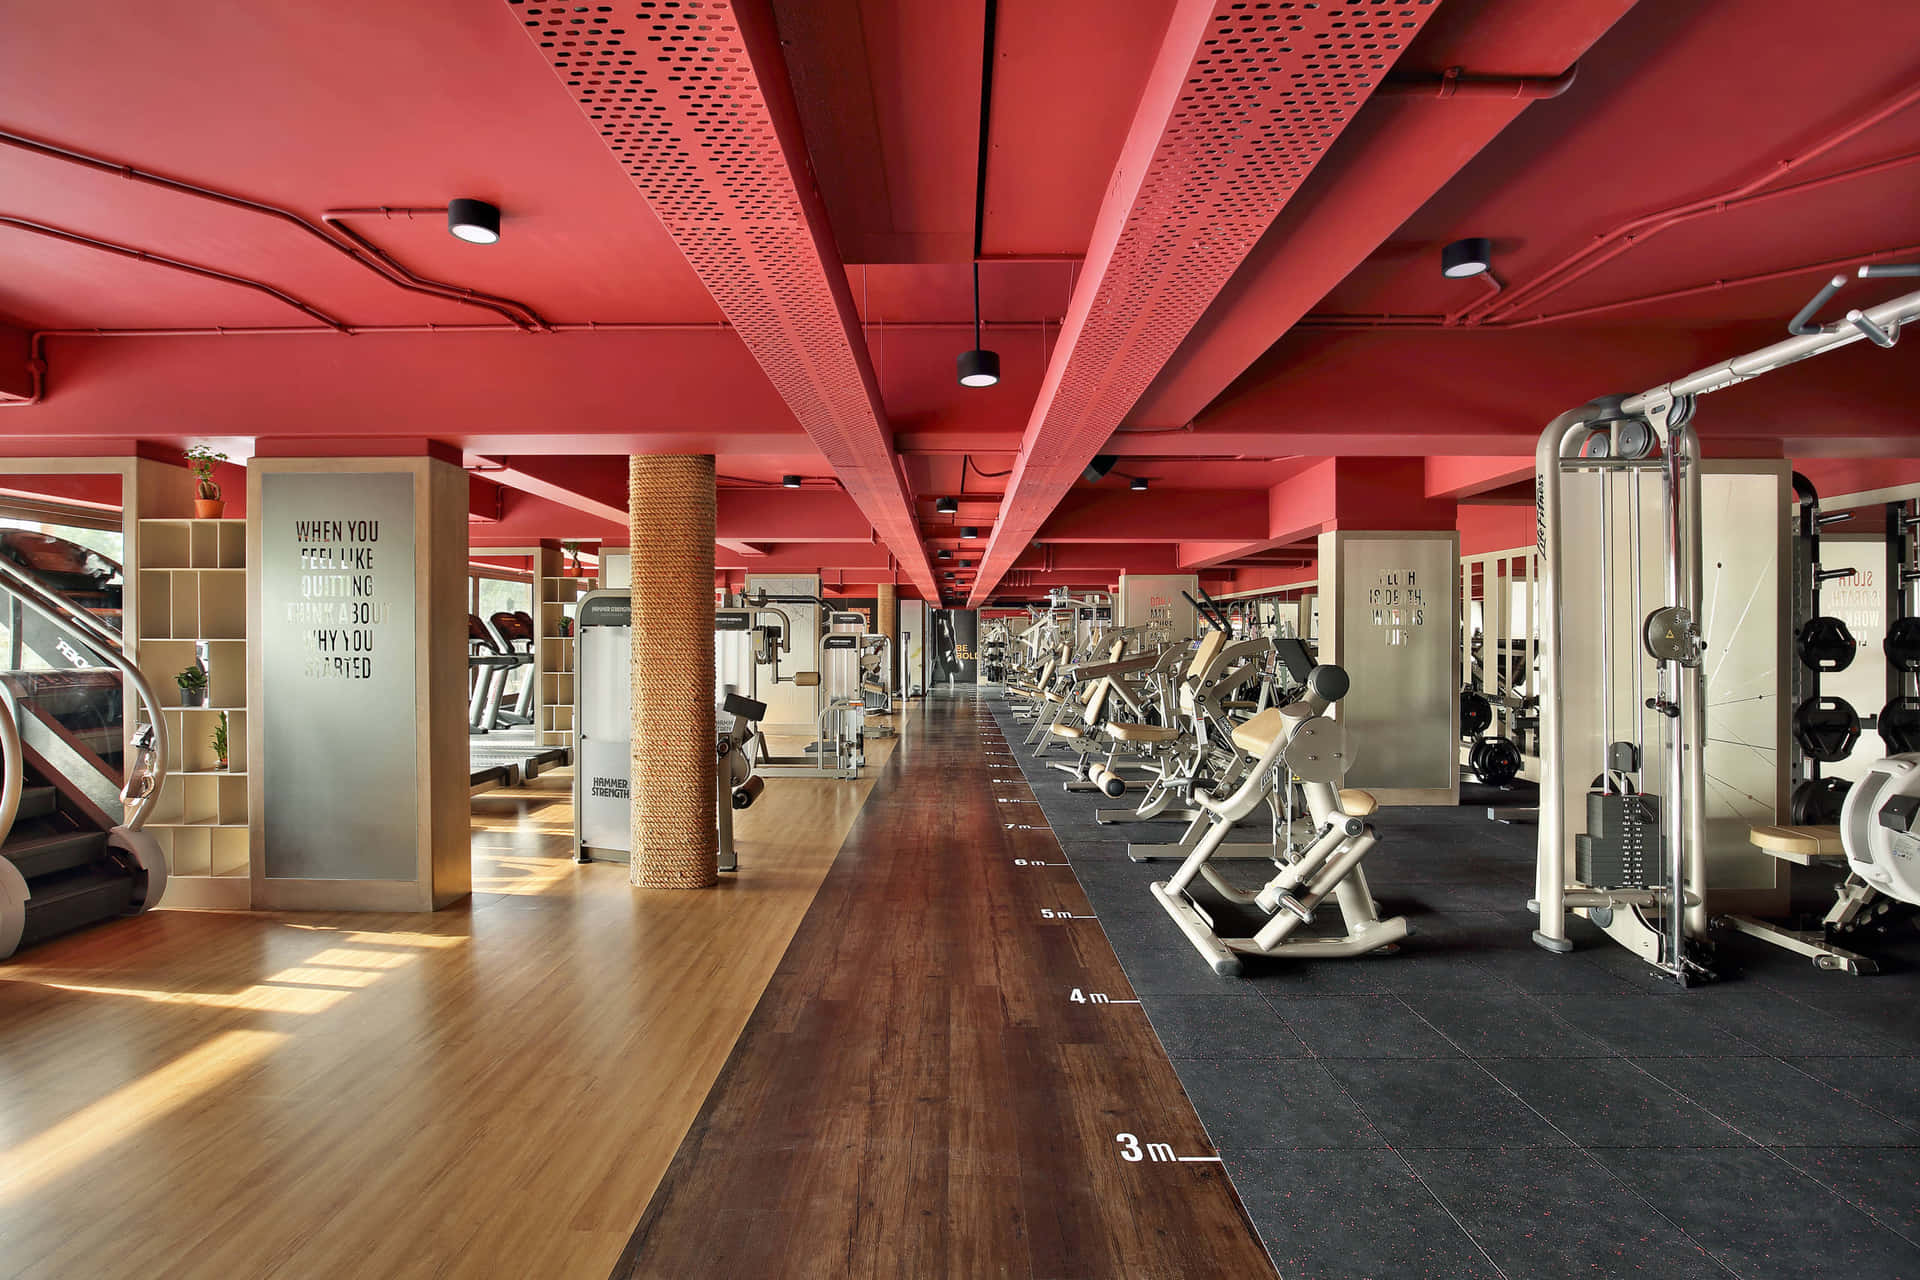 Make your commitment to fitness with a great gym session today